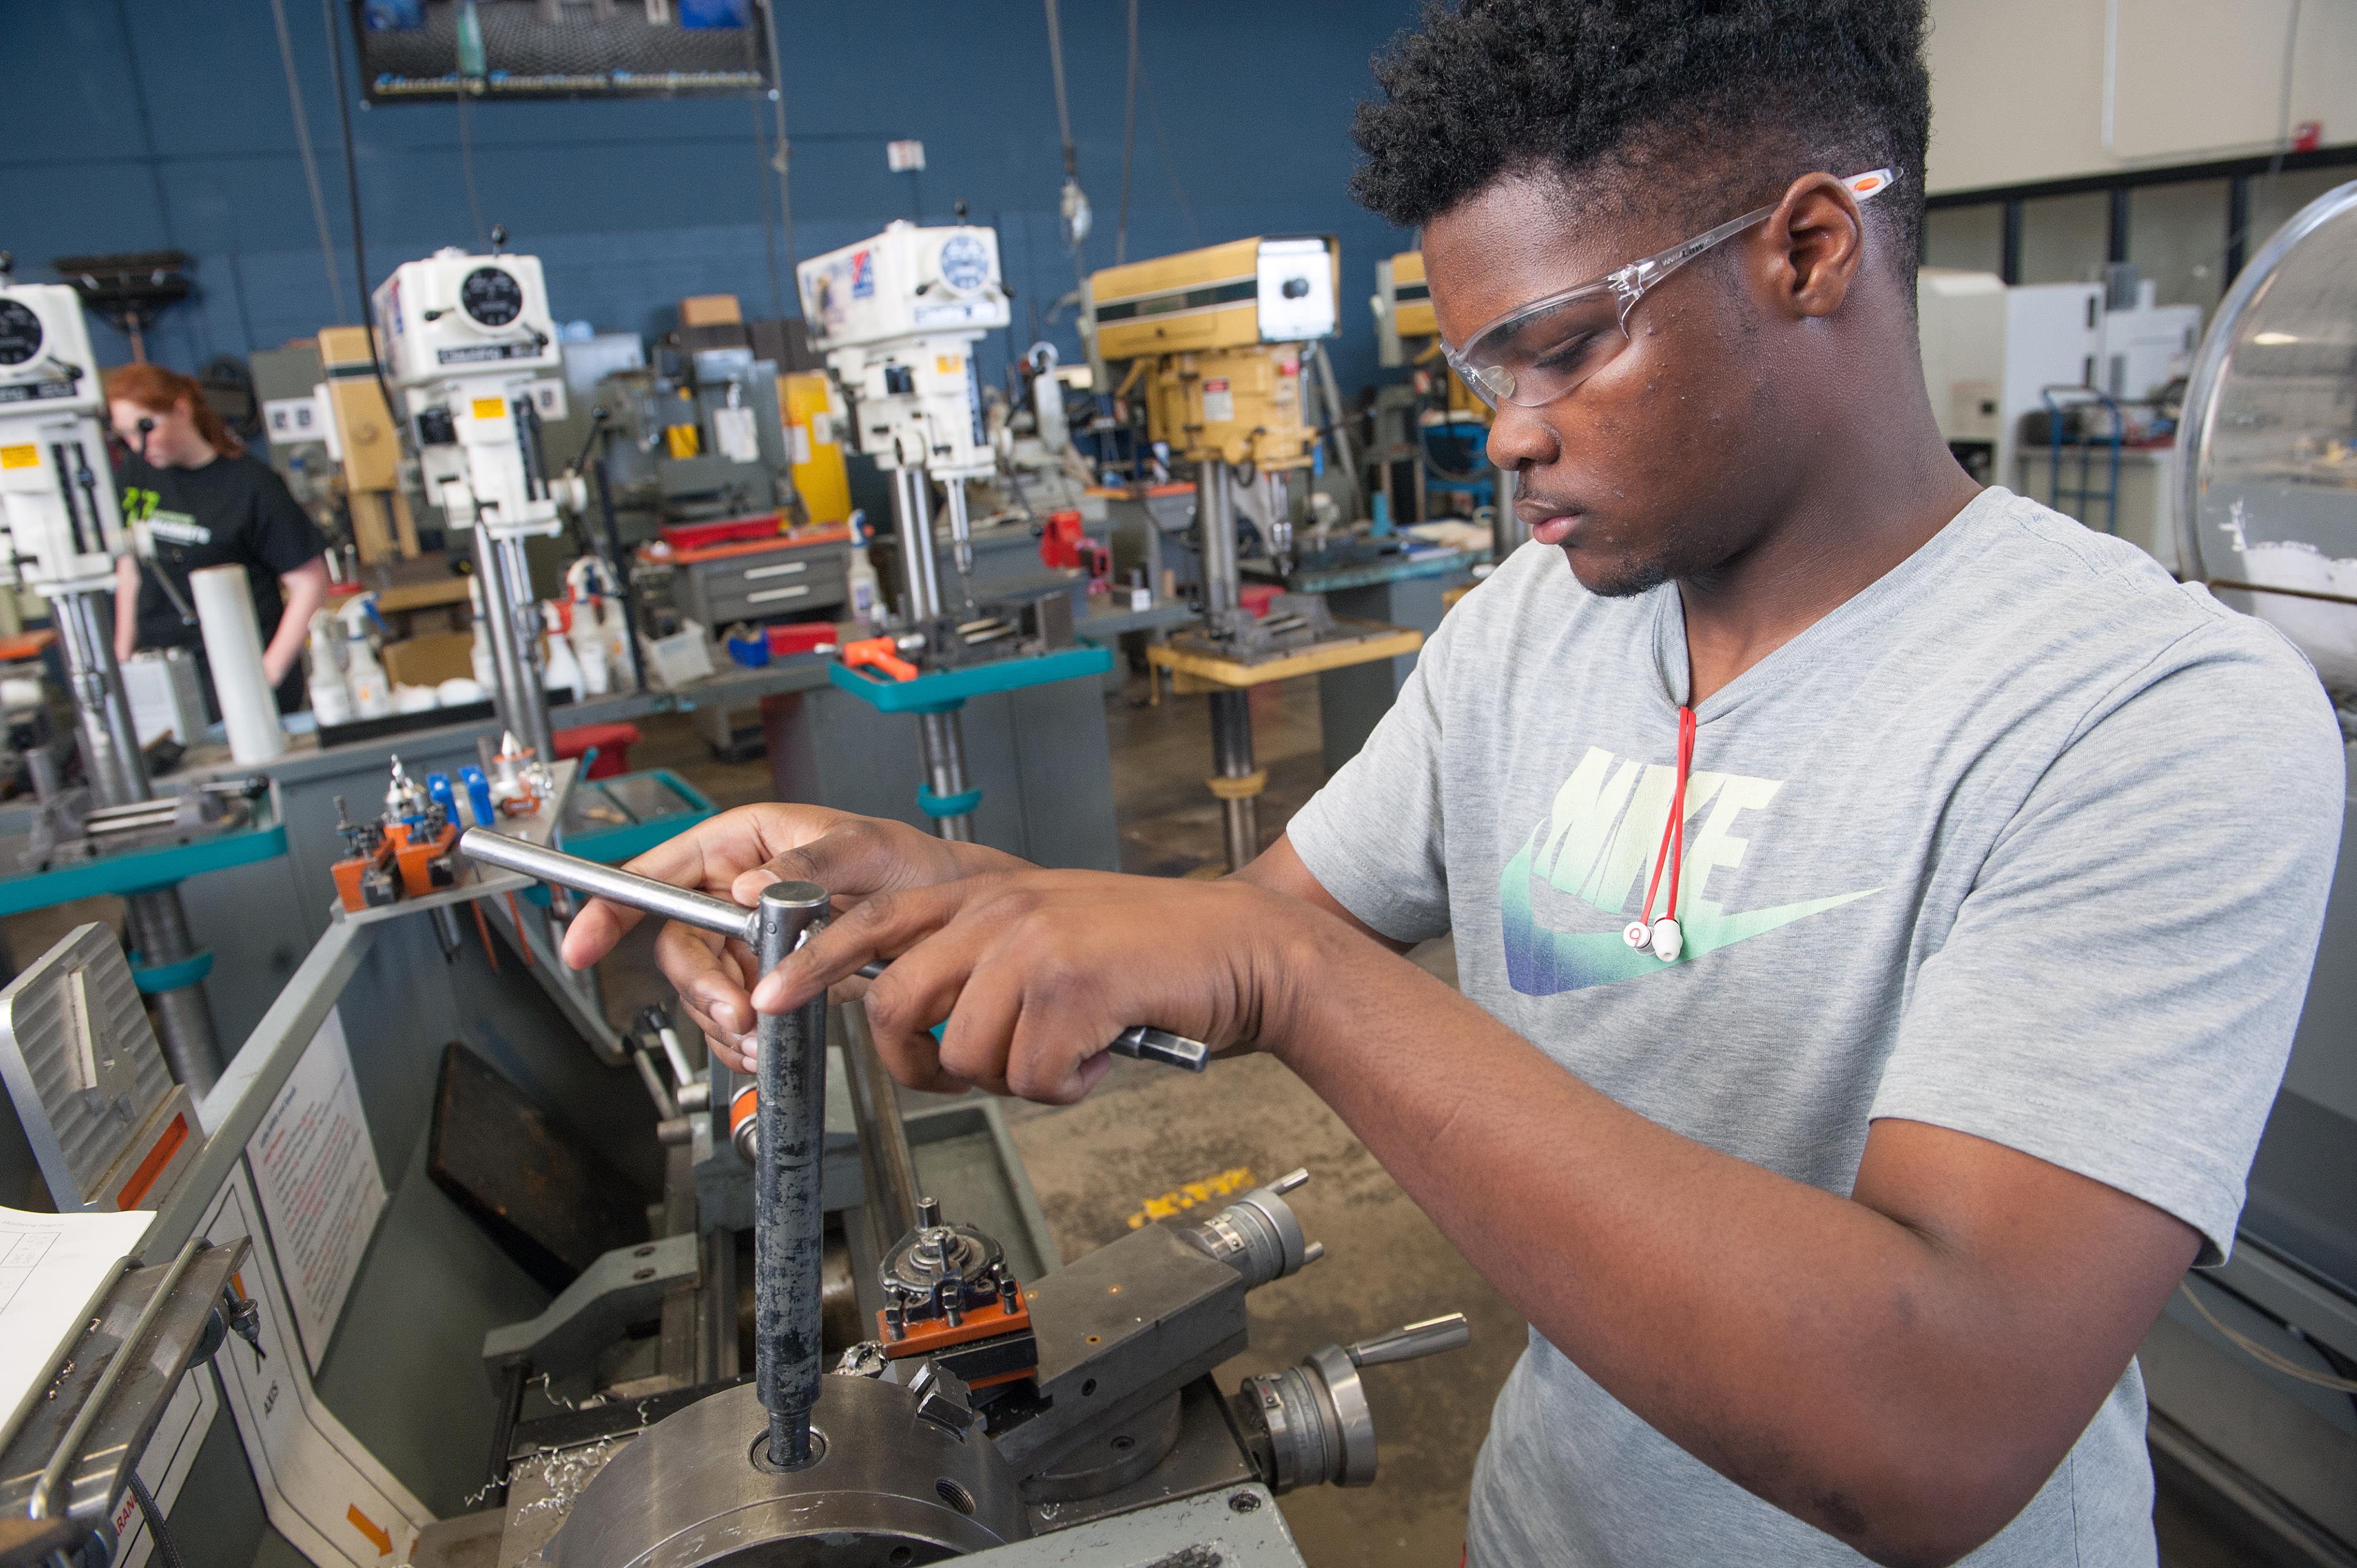 Male Precision Machining student working on a lathe in class